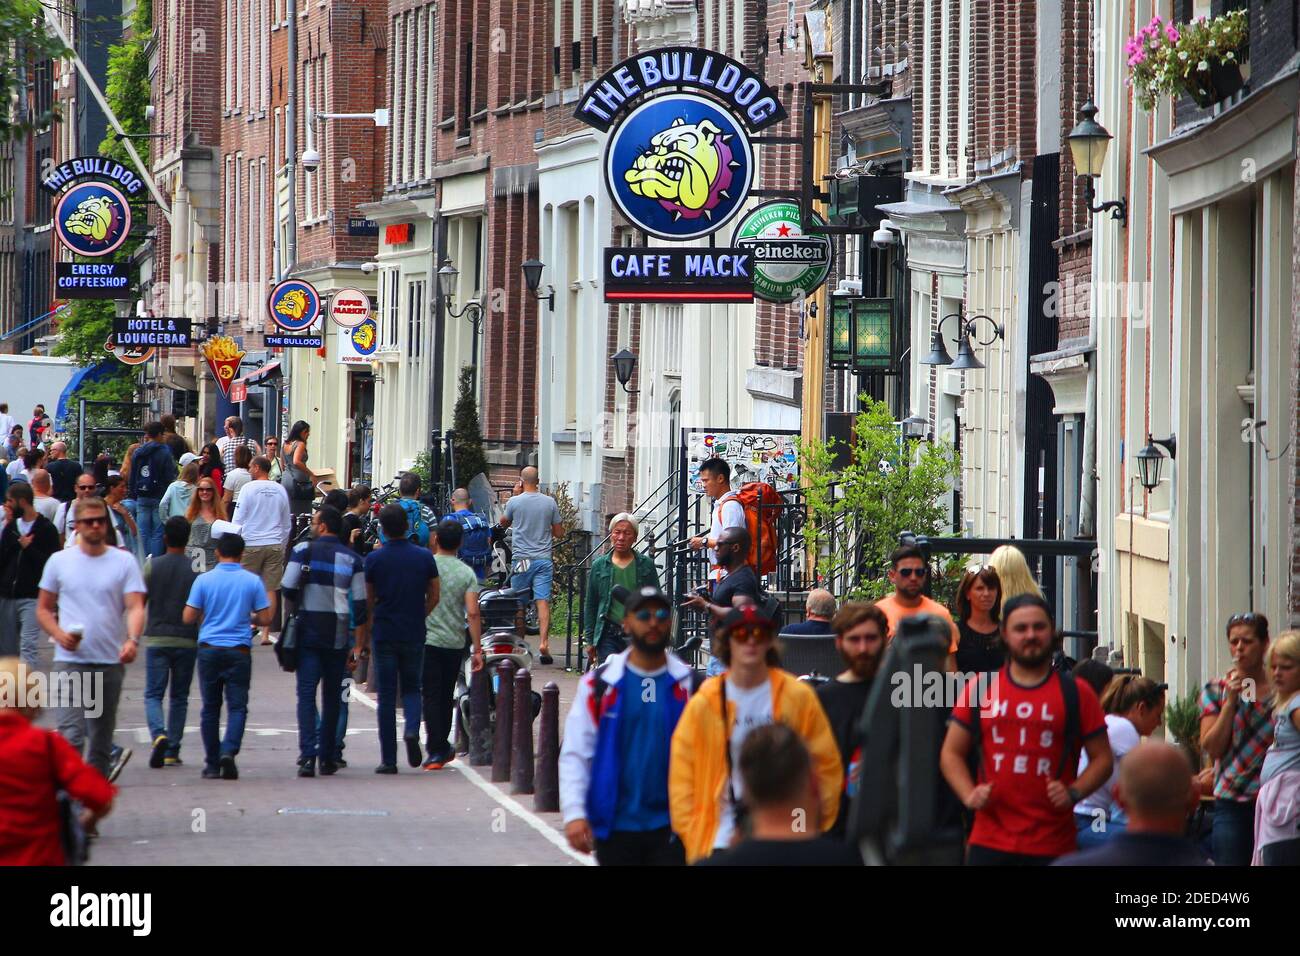 AMSTERDAM, NETHERLANDS - JULY 10, 2017: People visit The Bulldog coffee shop in Amsterdam, Netherlands. Coffeeshops legally sell marijuana for persona Stock Photo